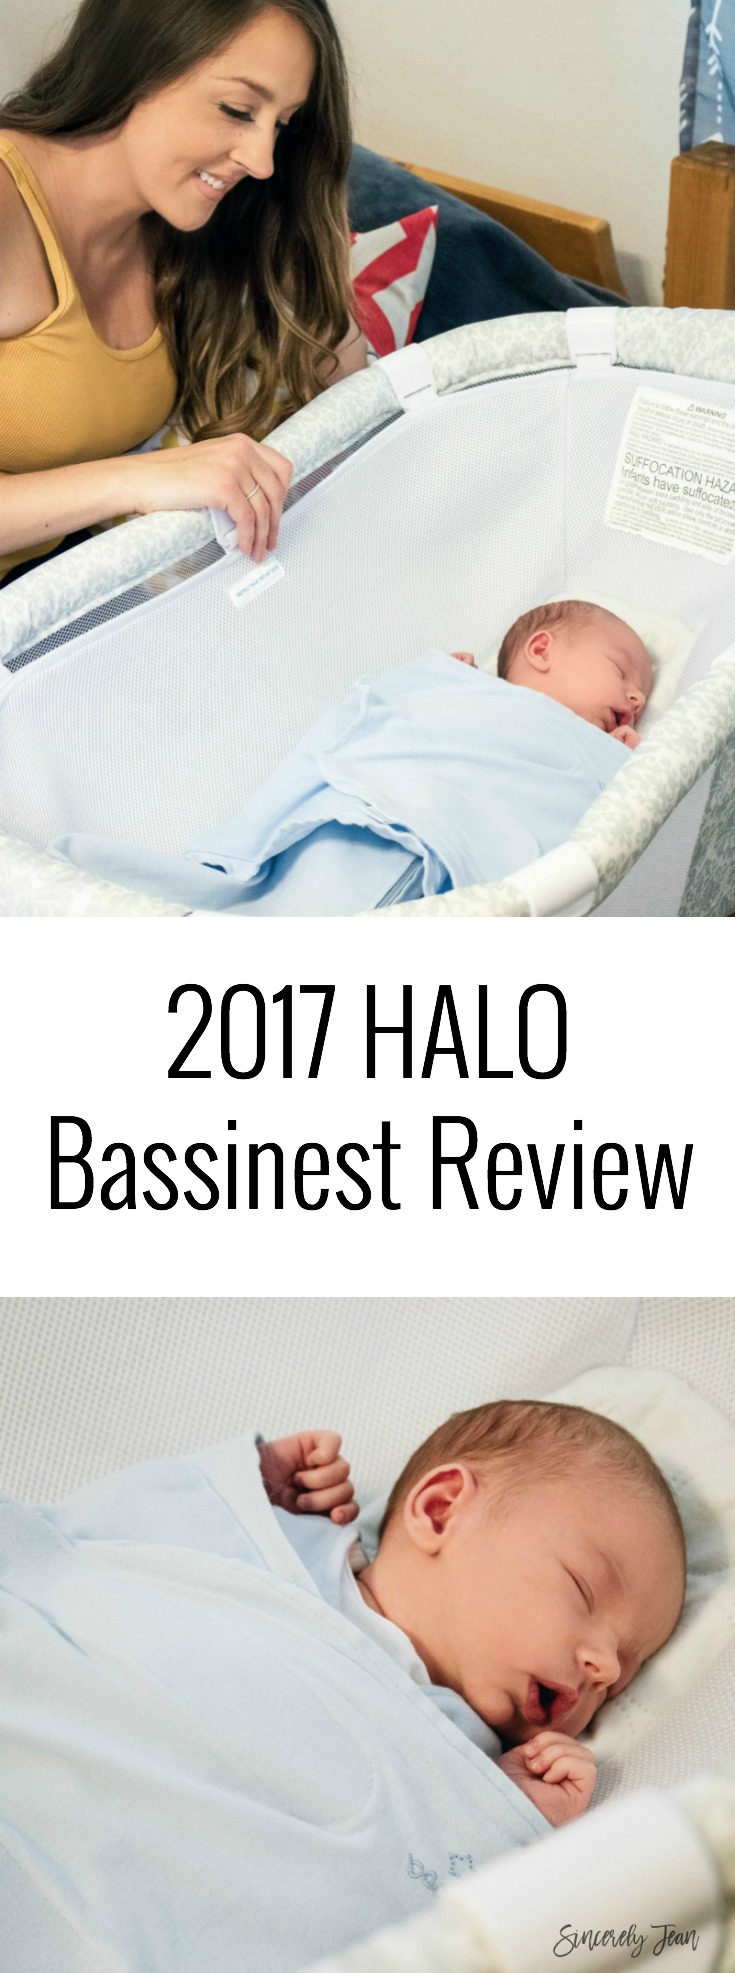 2017 Halo Bassinest, Newborn Insert, and Swaddle review by SincerelyJean.com